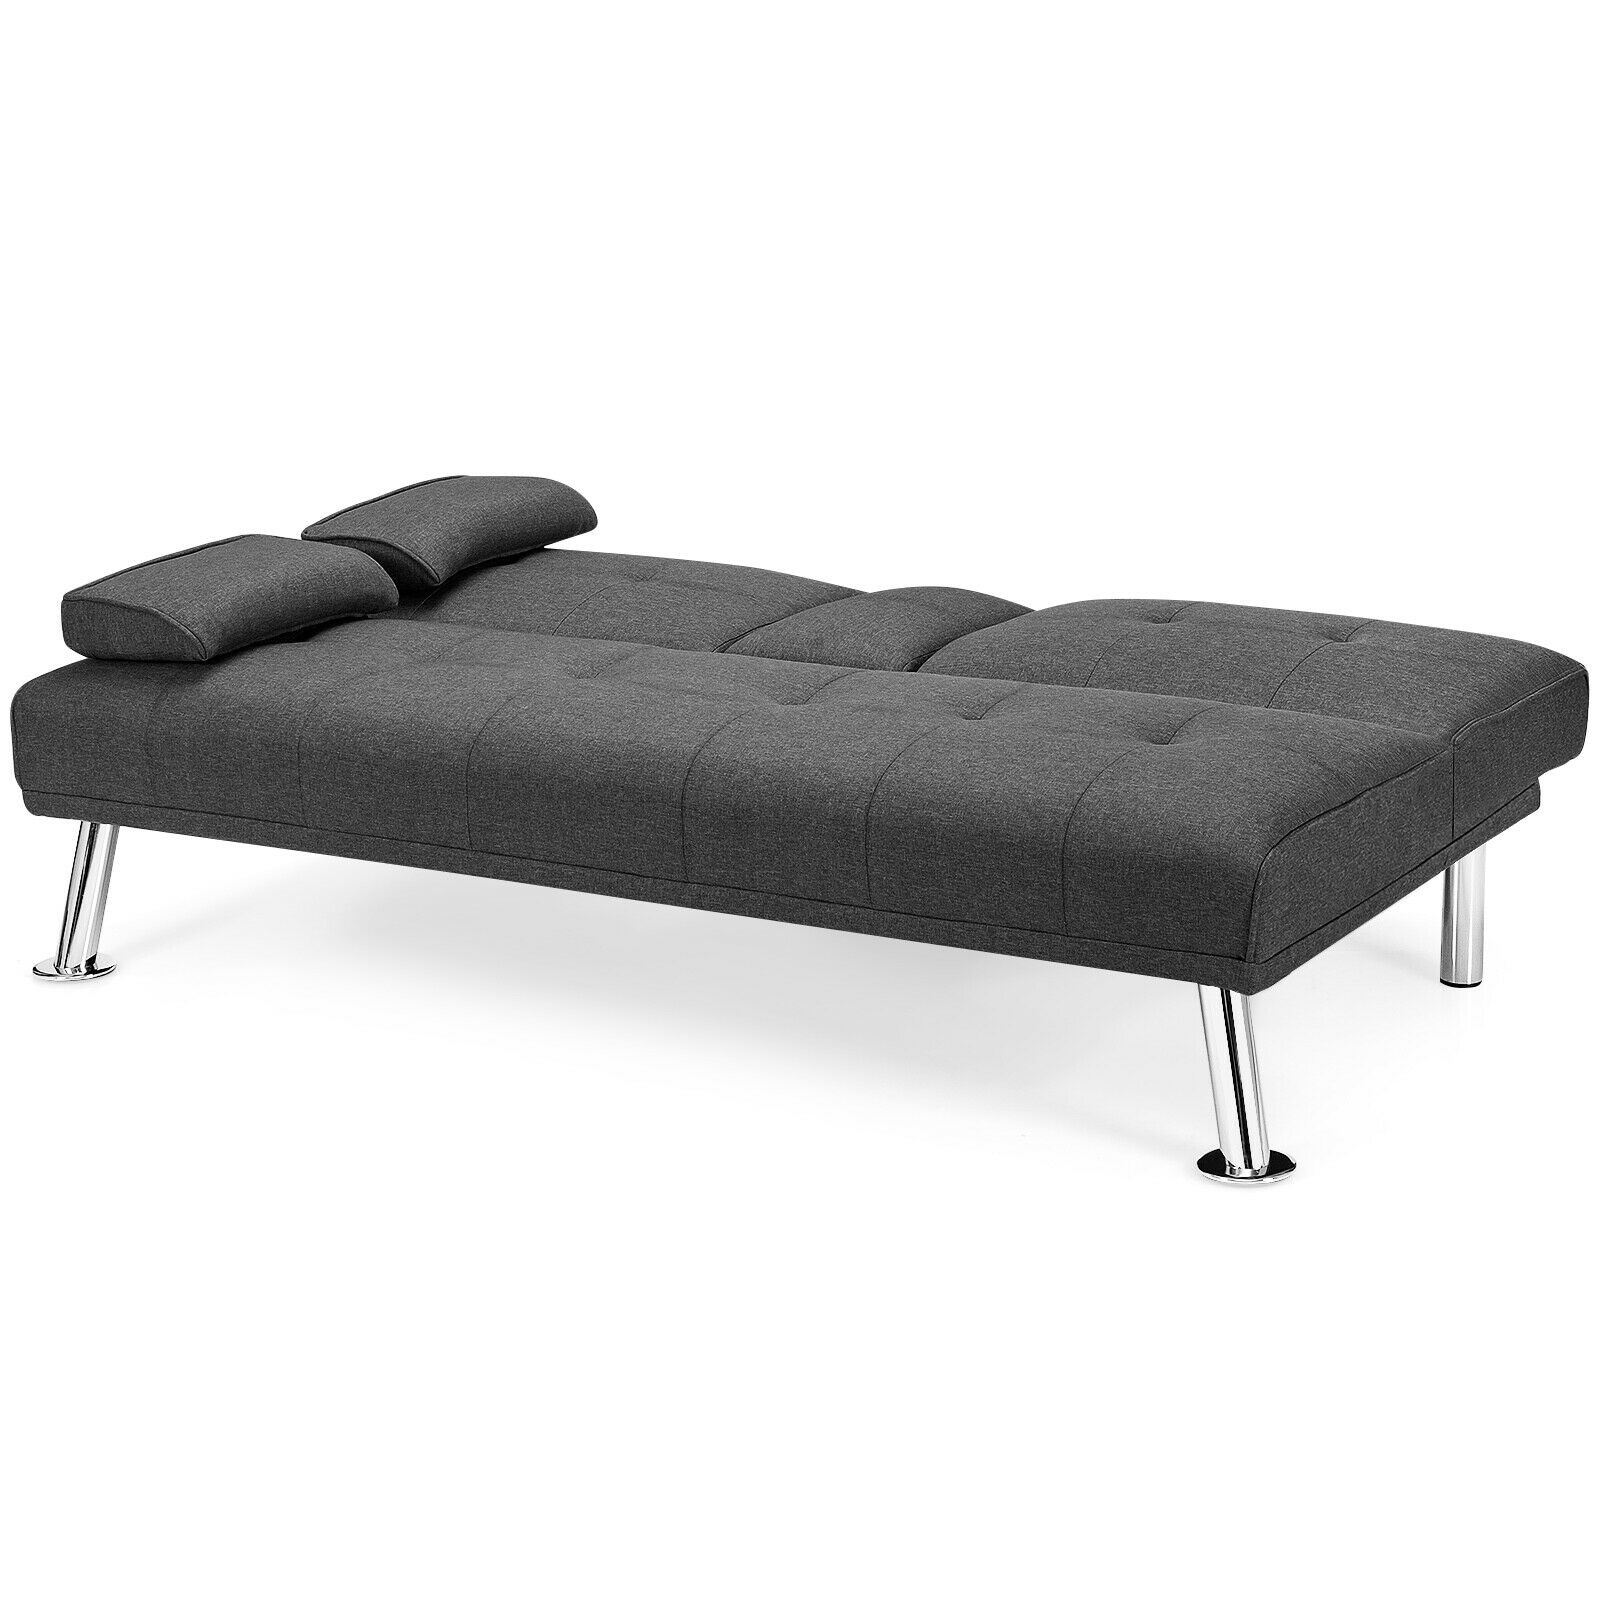 Echter Relatie voordelig WELLFOR CY Sofa Bed White Contemporary/Modern Polyester Sofa Bed in the  Futons & Sofa Beds department at Lowes.com